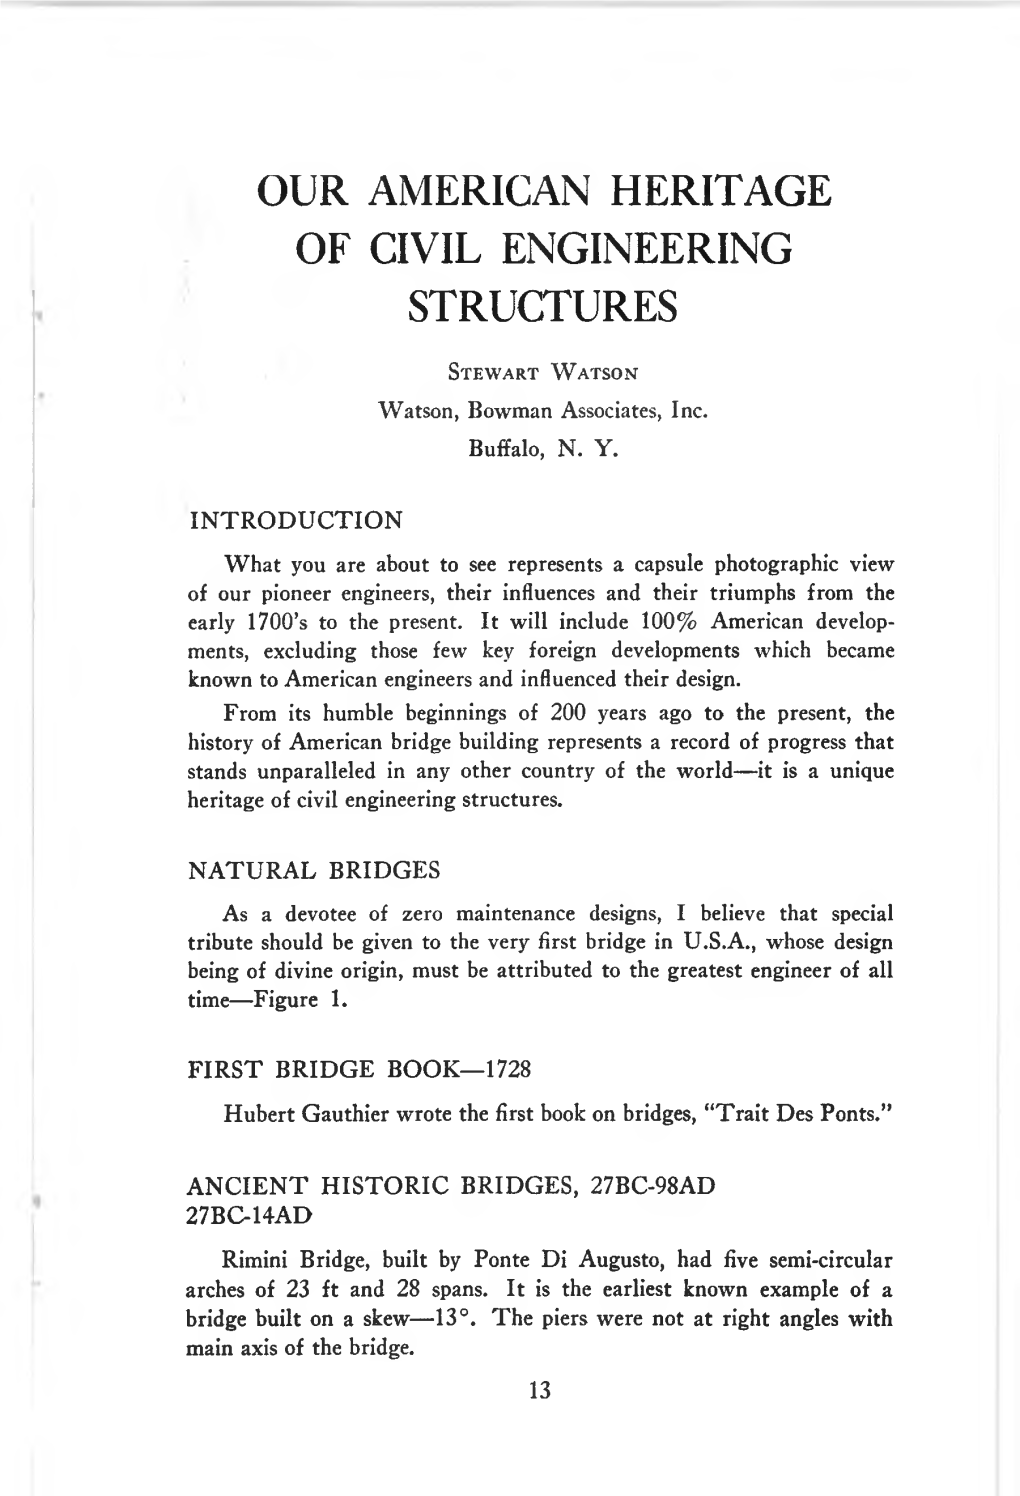 Our American Heritage of Civil Engineering Structures